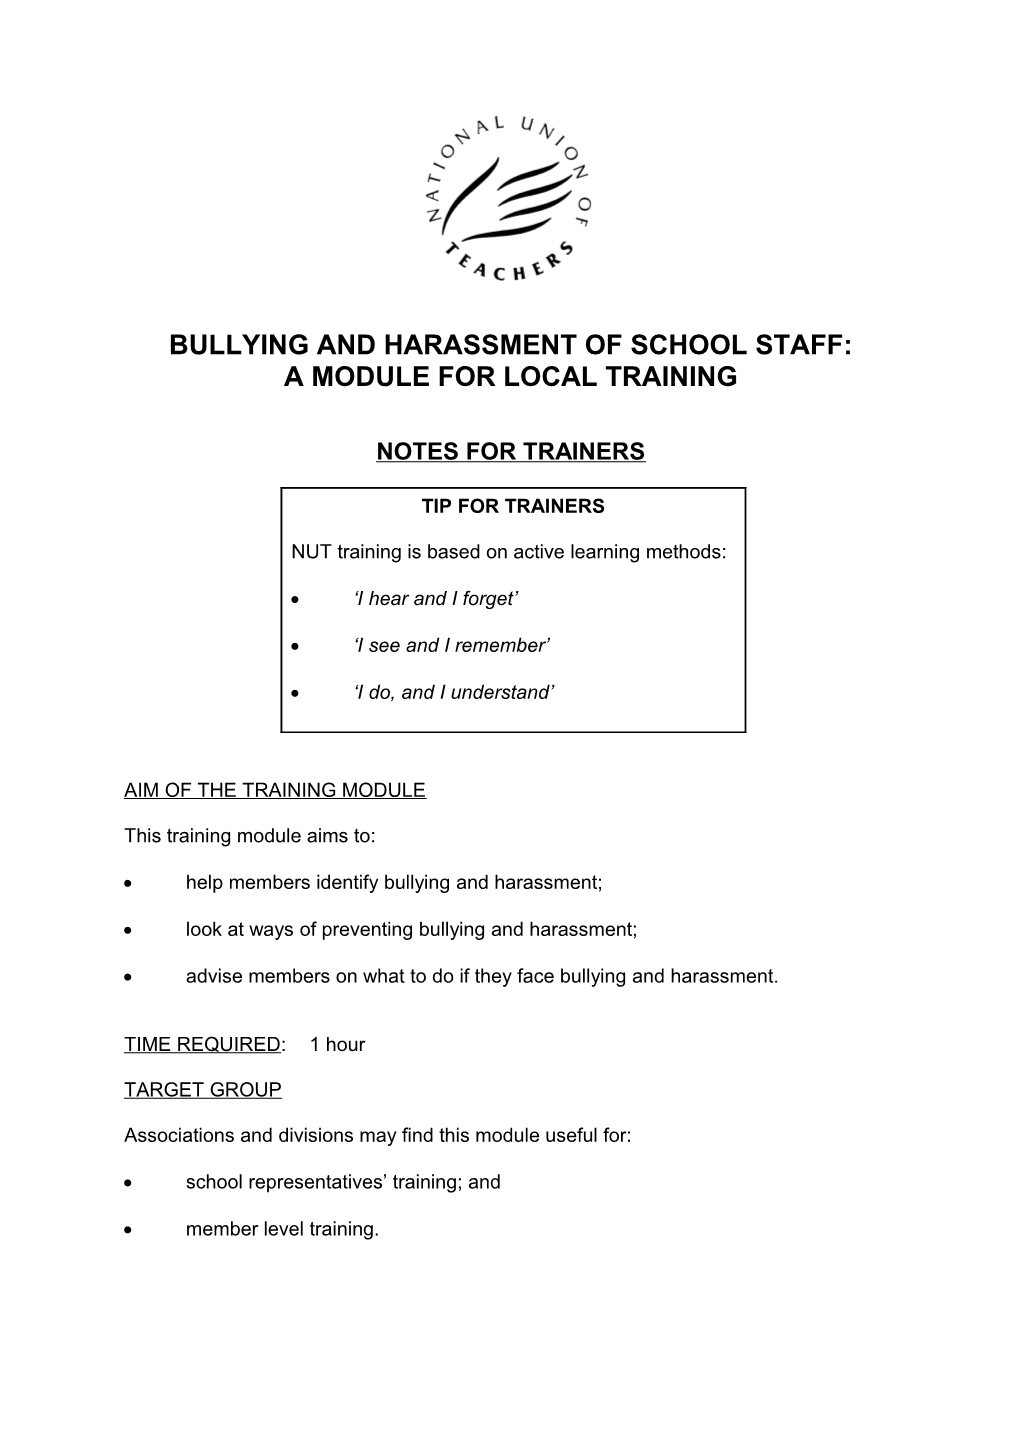 Bullying and Harassment of School Staff